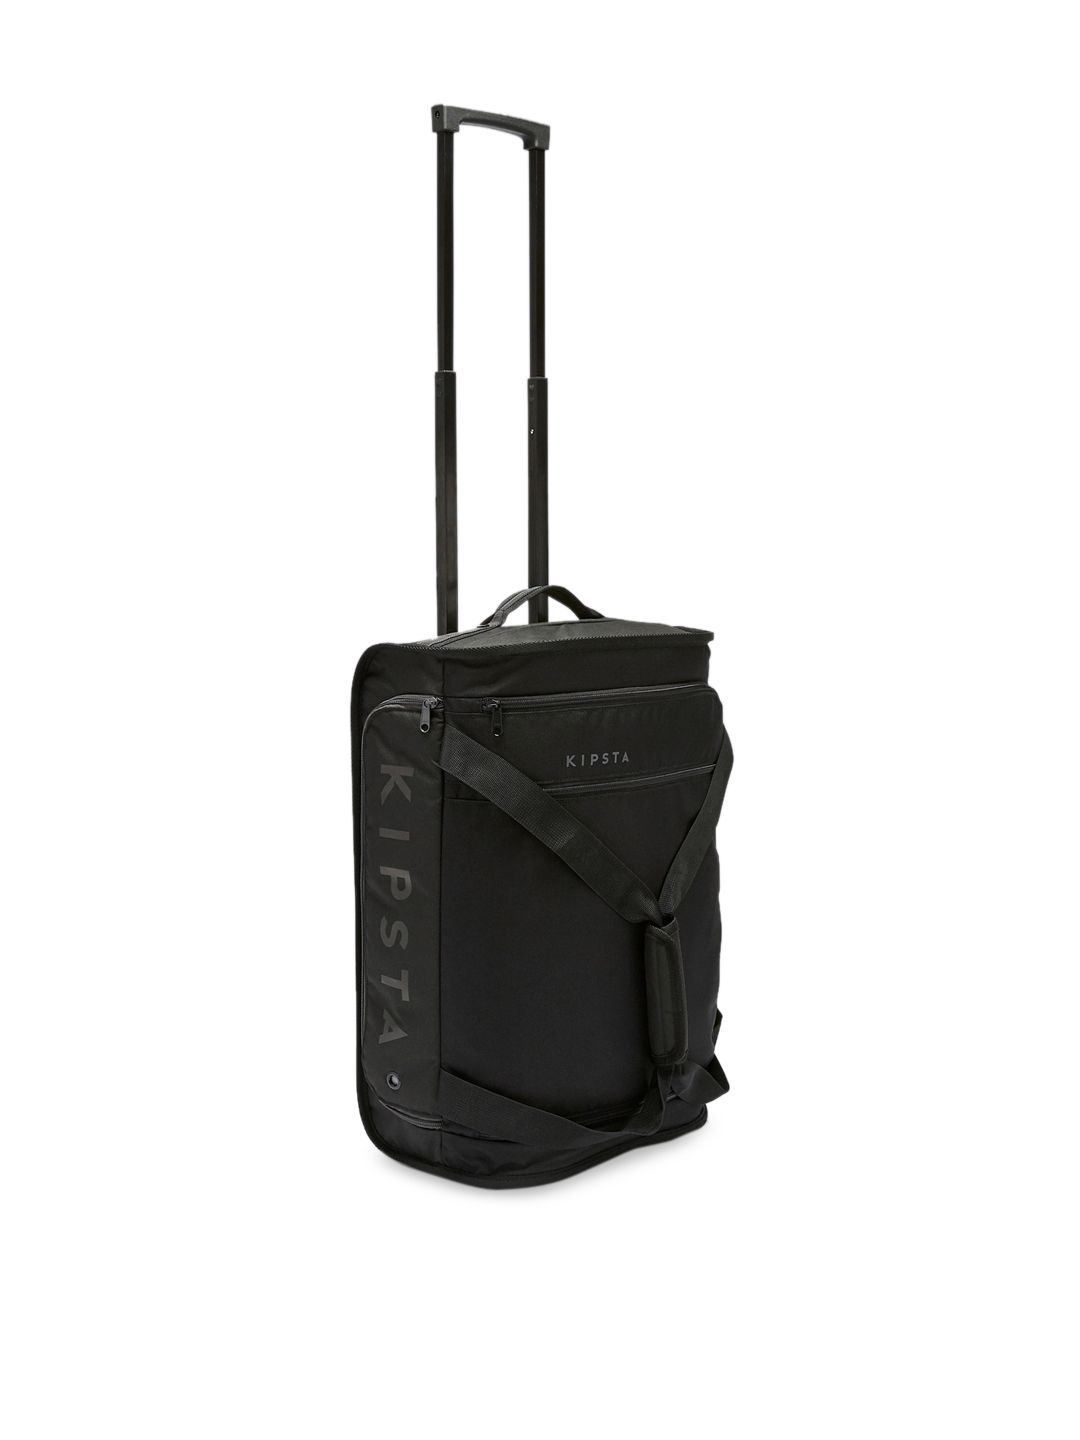 Kipsta By Decathlon Unisex Black Solid Sports Trolley Bag Price in India